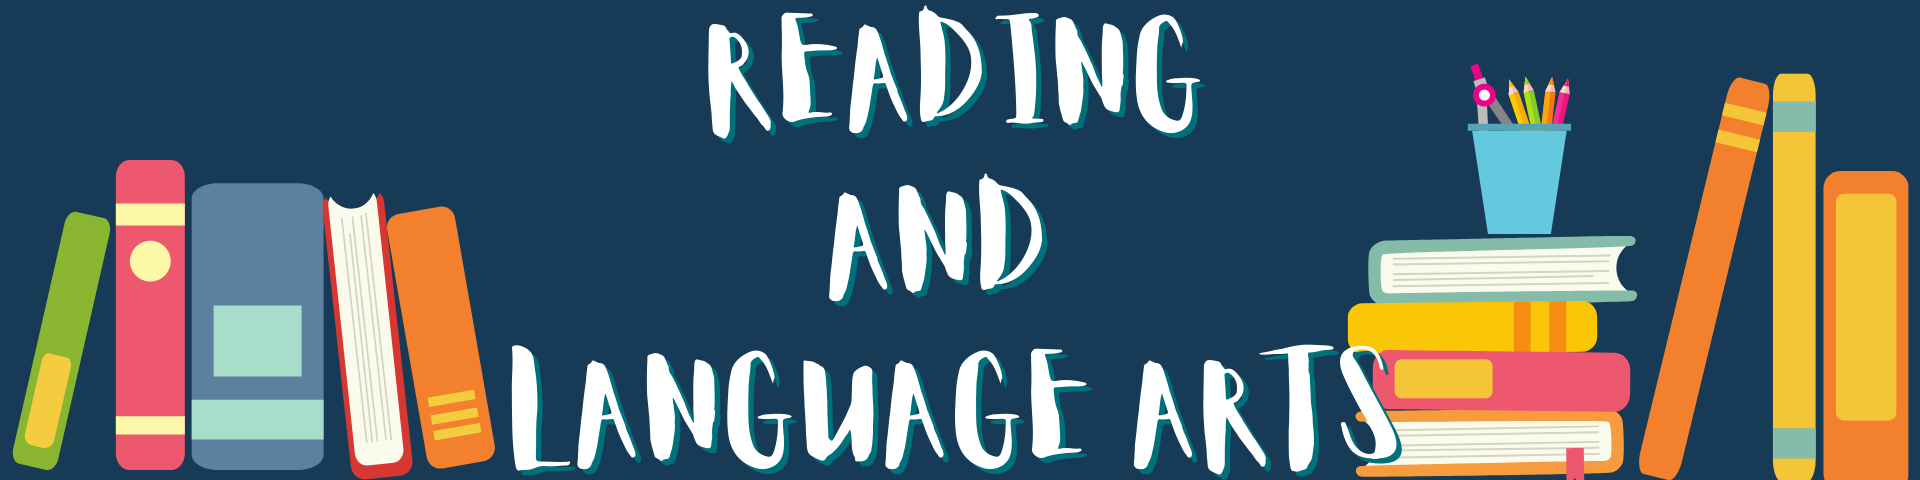 Reading and Language Arts Welcome Banner